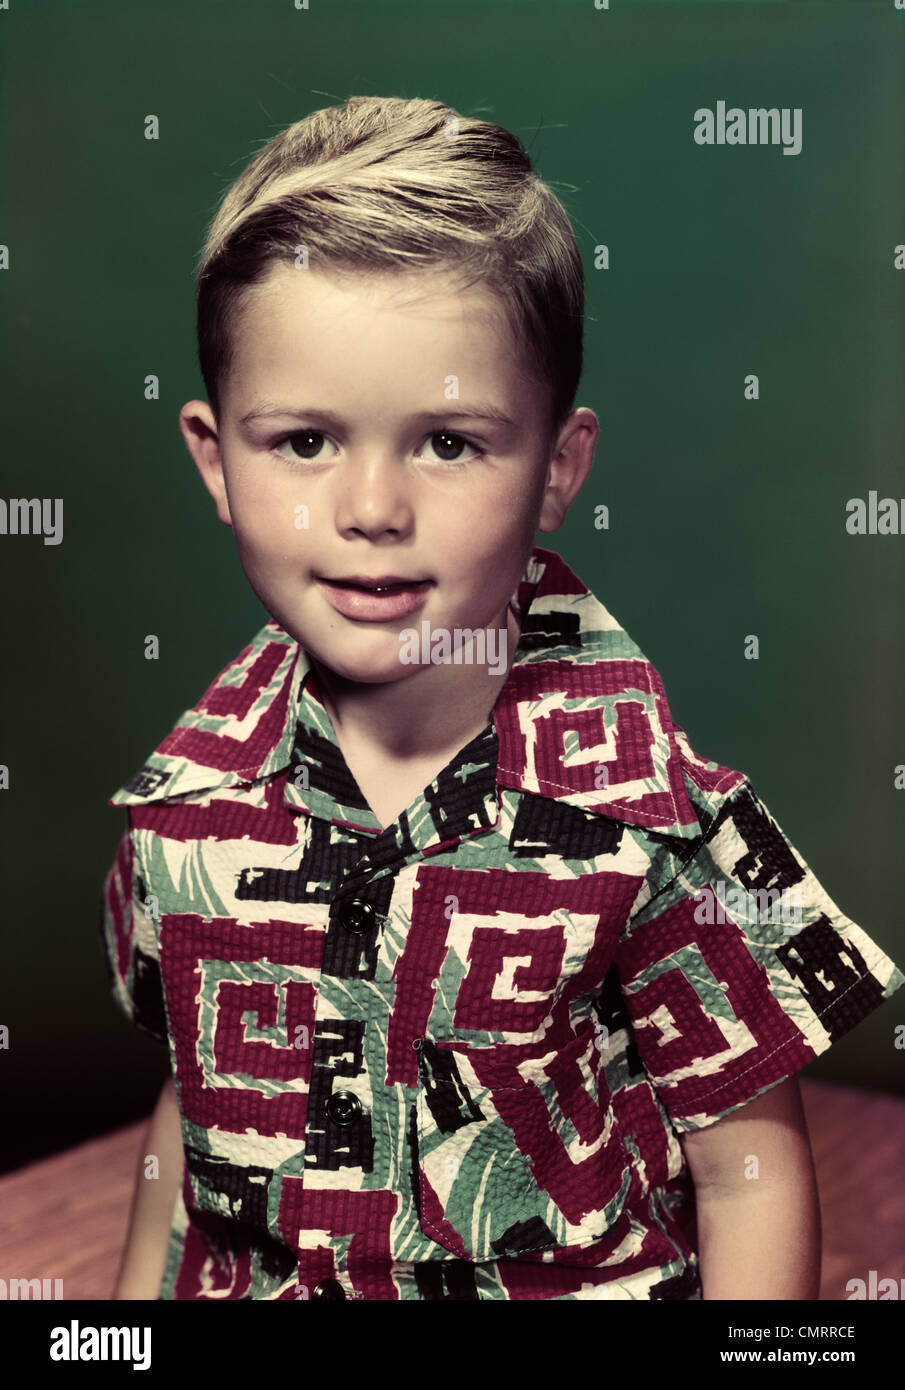 1950s PORTRAIT SMILING BOY WEARING GRAPHIC PRINTED SHIRT LOOKING AT CAMERA Stock Photo